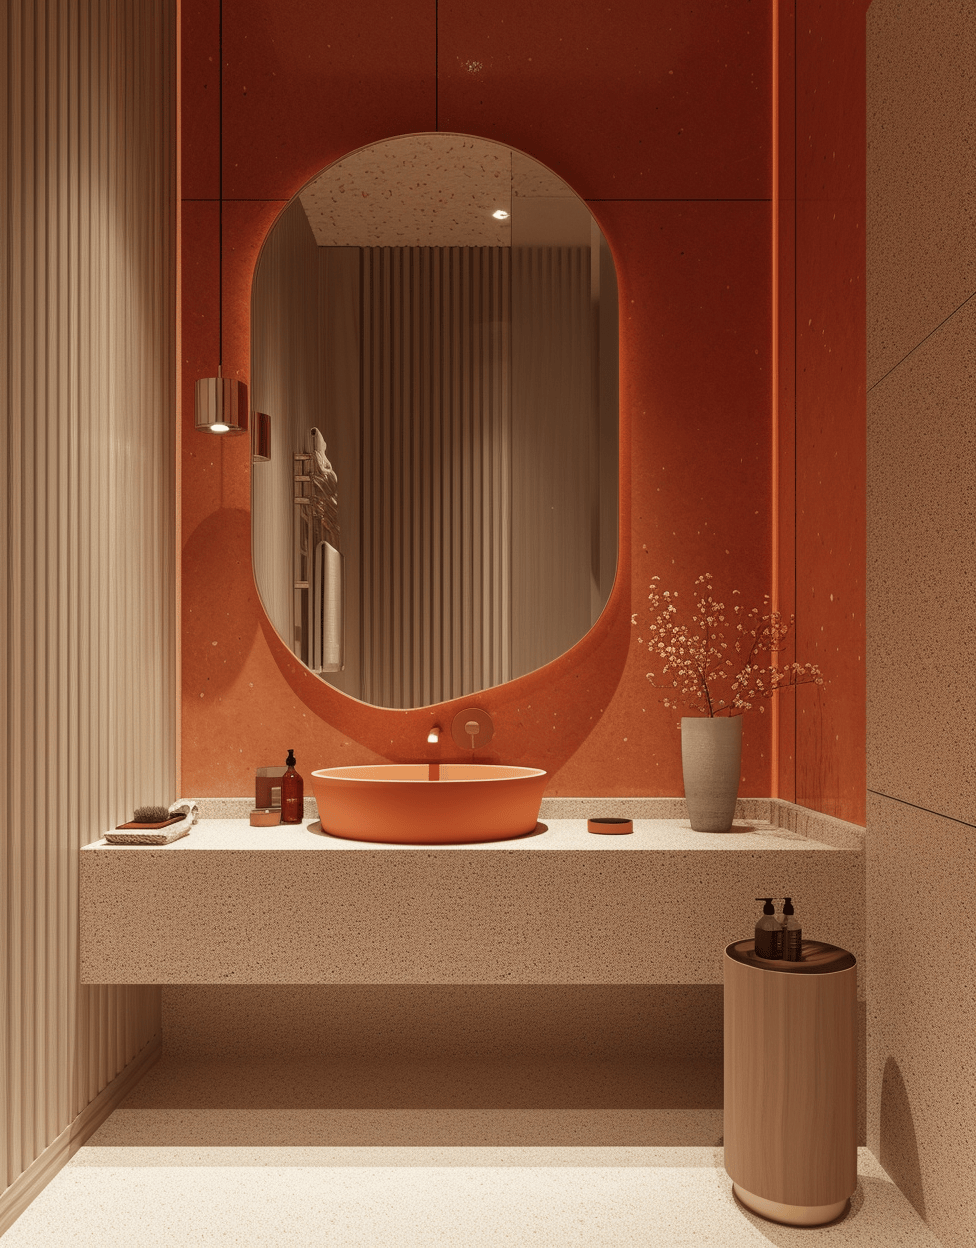 Groovy 70s bathroom design inspirations with vibrant hues and dynamic textures